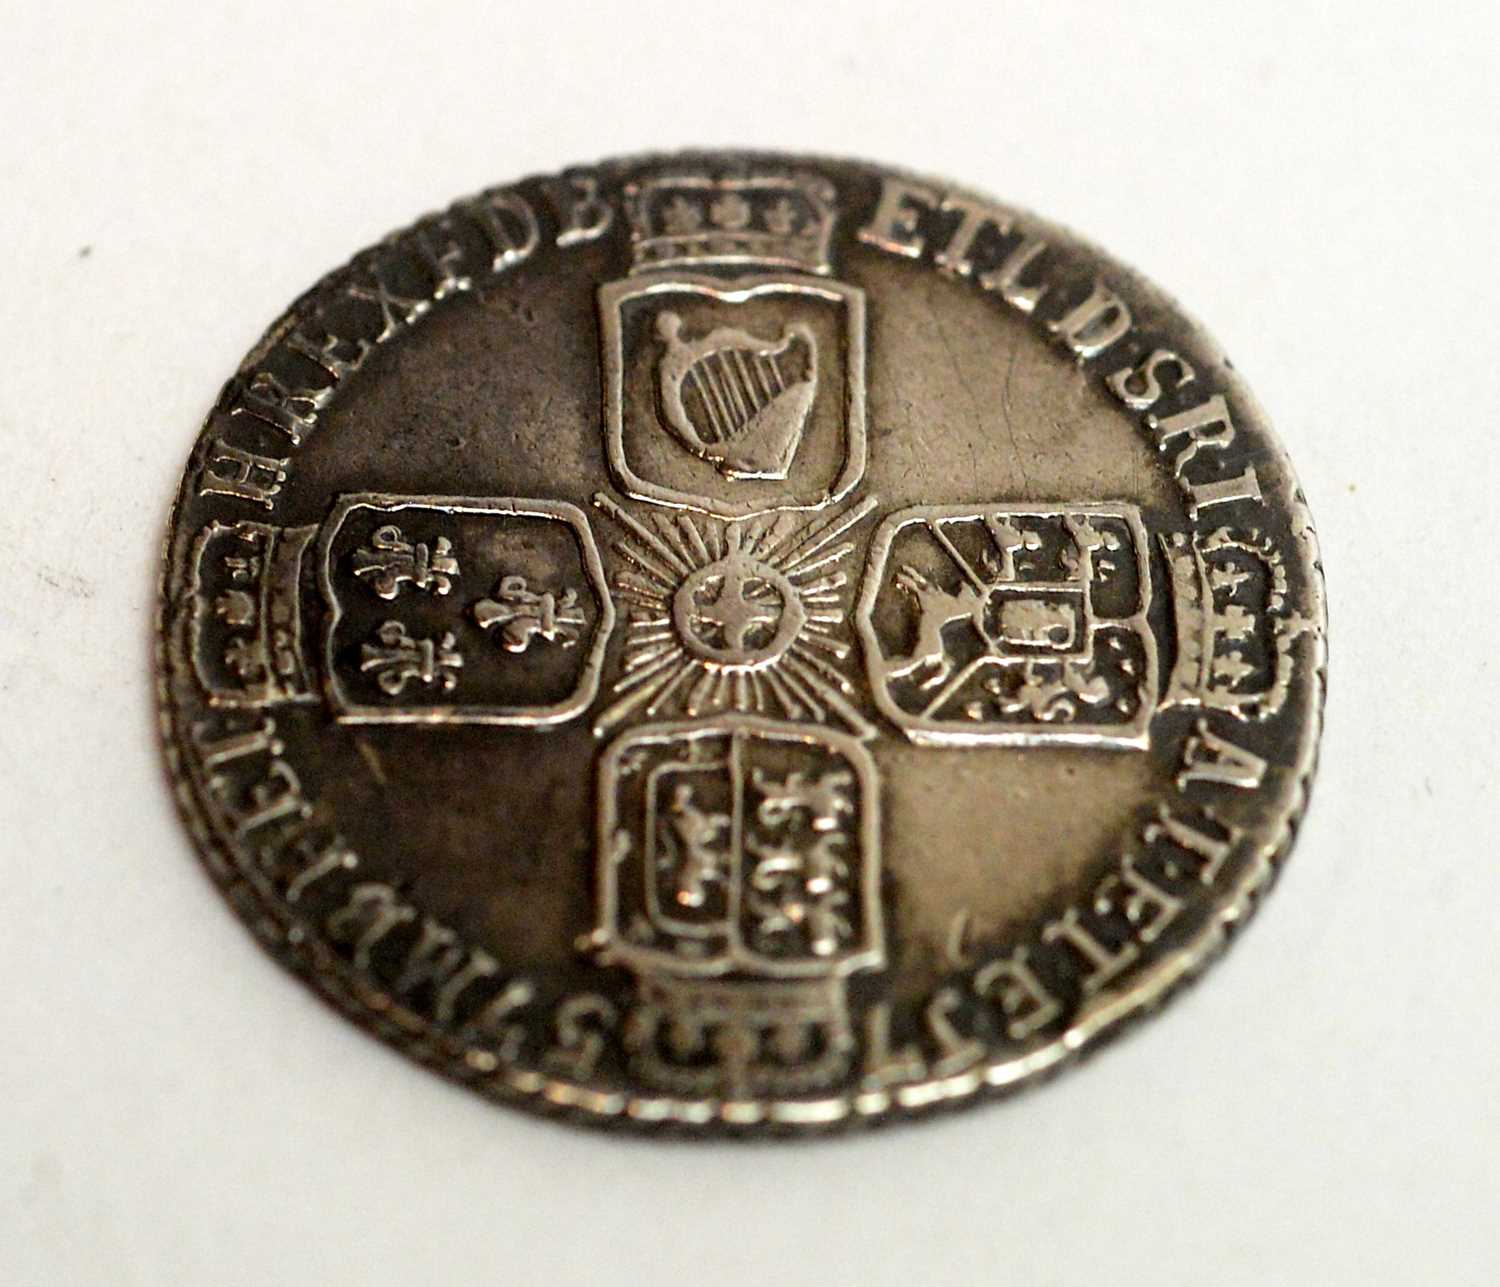 A George II sixpence, and other British and Foreign coins and banknotes - Image 3 of 8